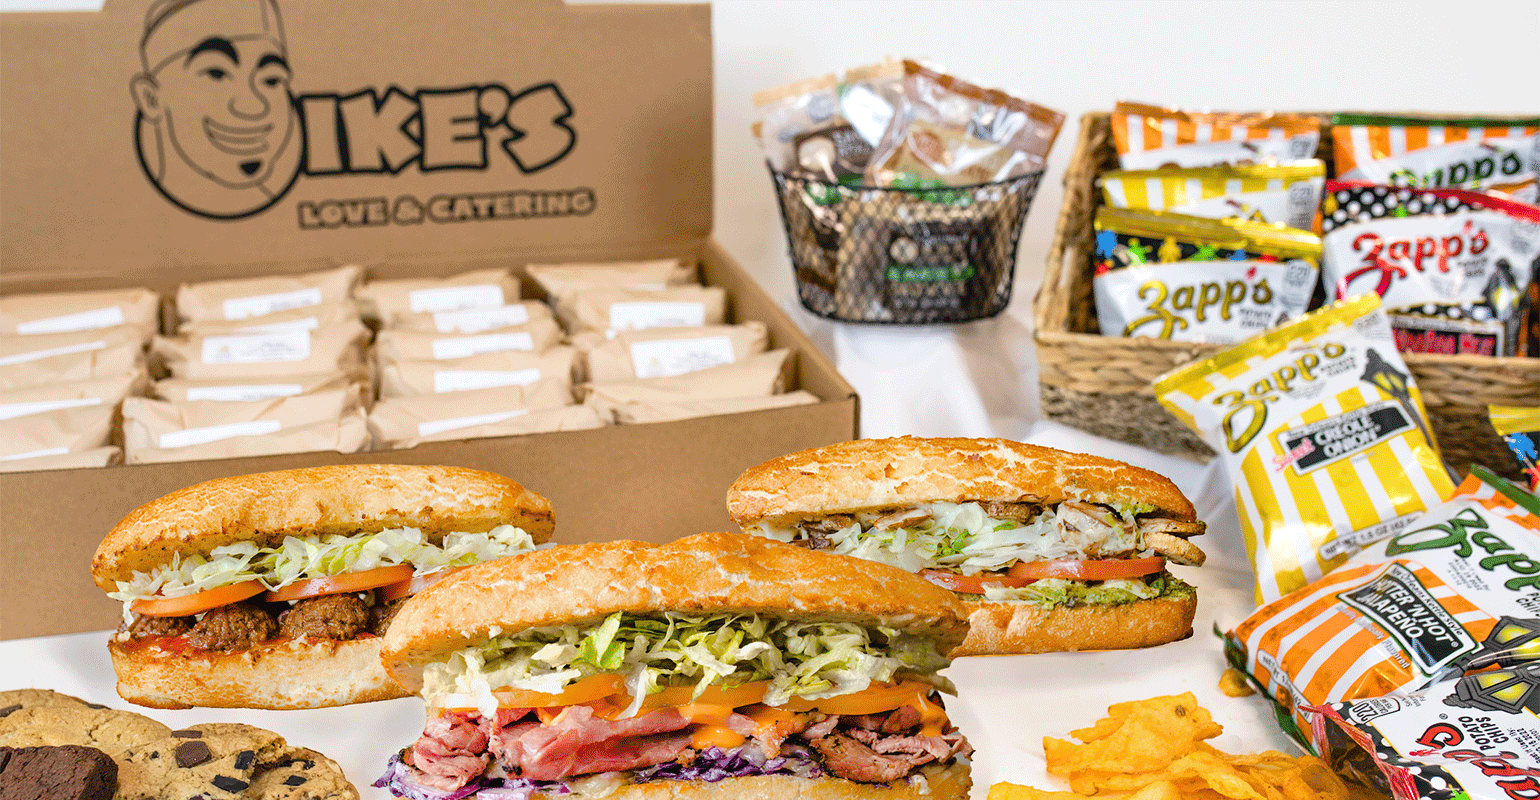 Ike's Love & Sandwiches launches new catering with $25 off